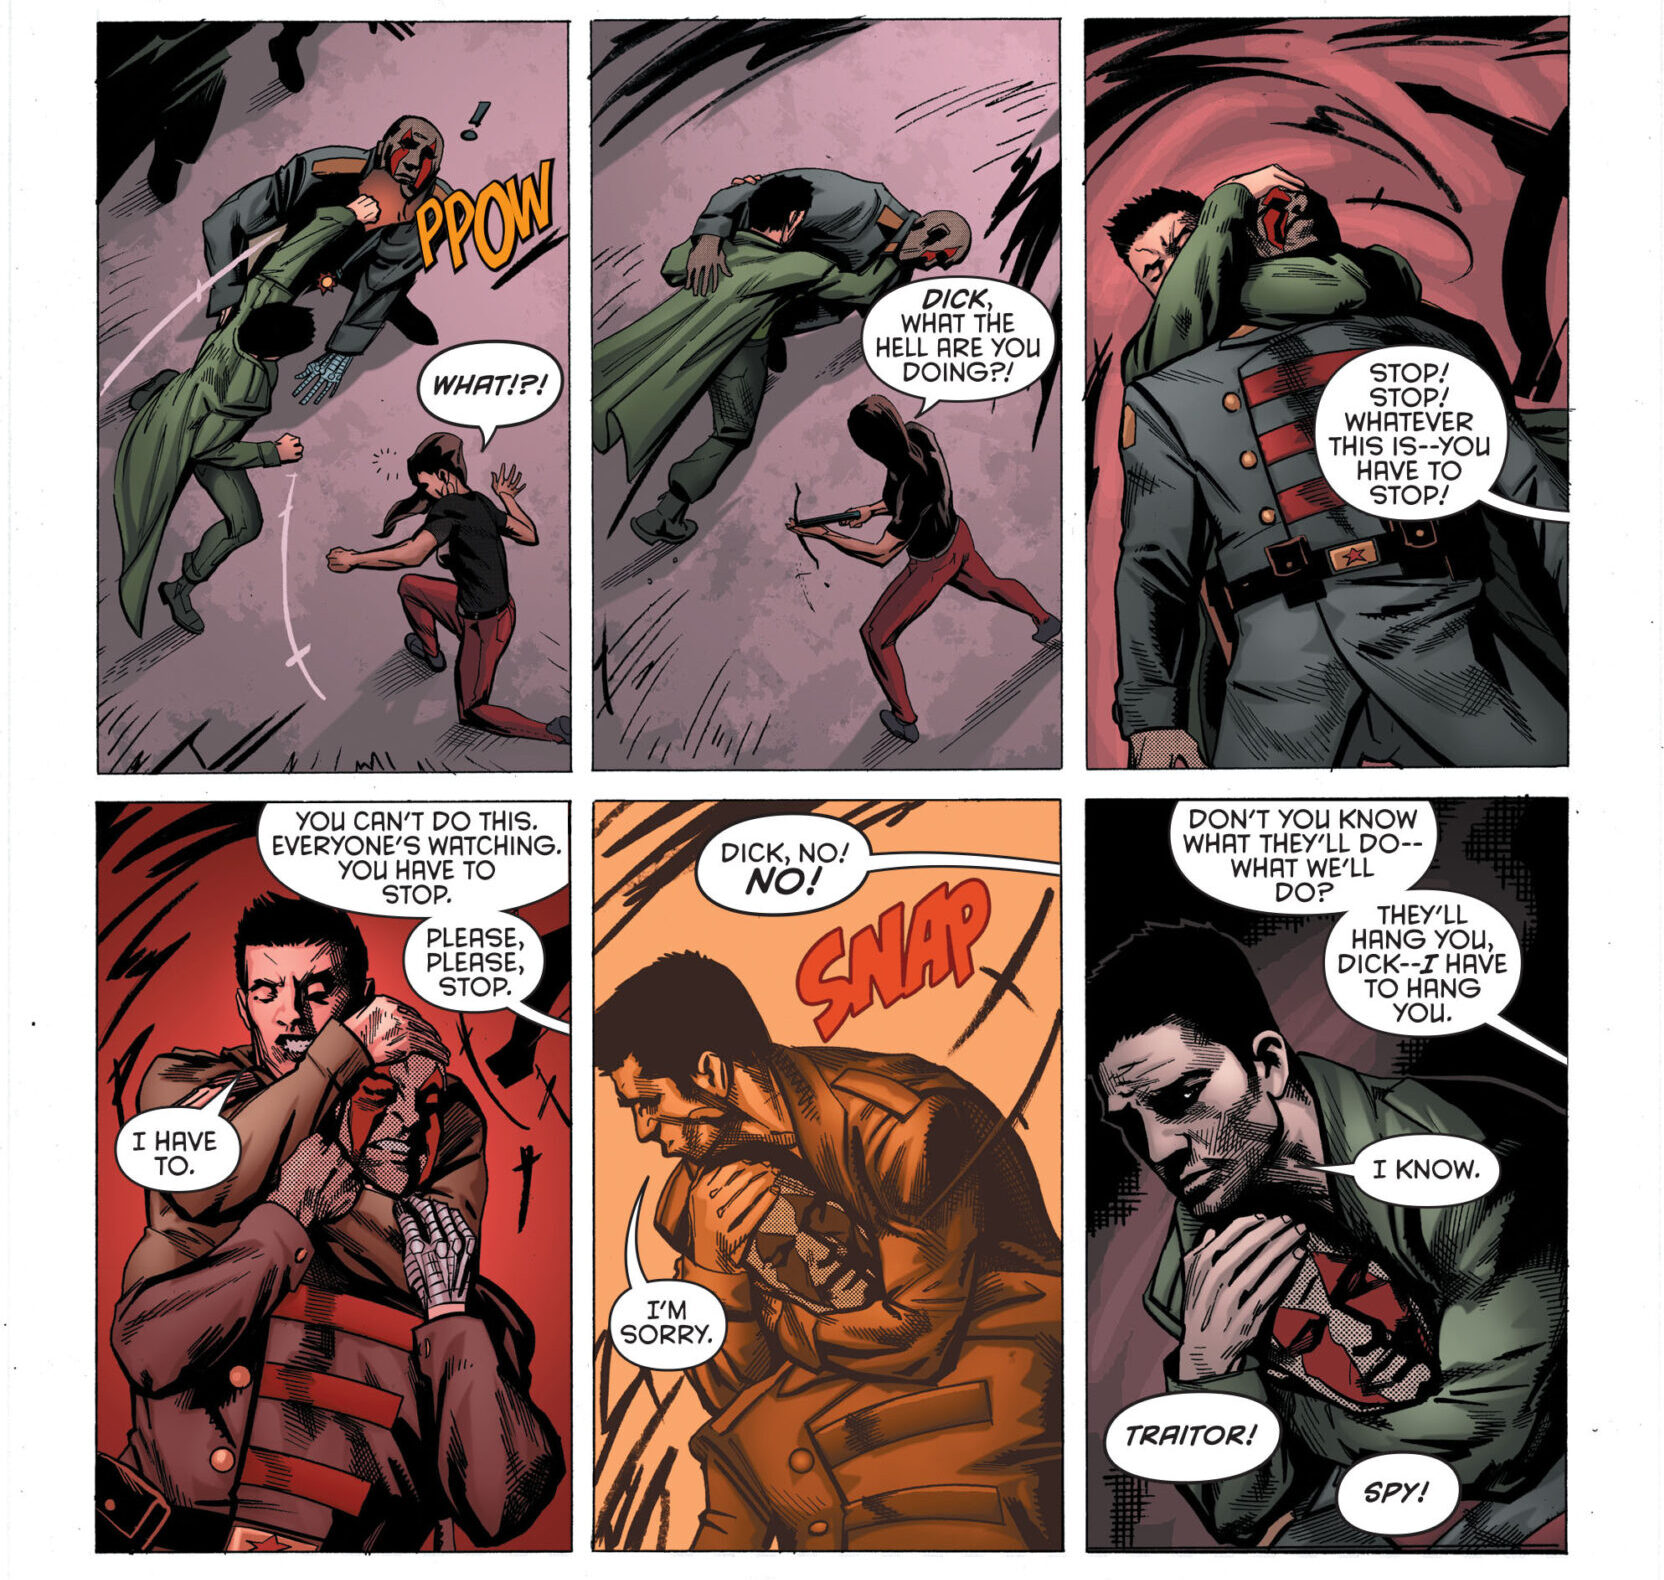 Dick Grayson snaps KGBeast's neck after learning the Russian leader tricked him into killing civilians in Future's End: Grayson Vol. 1 #1 "Only A Place For Dying" (2014), DC Comics